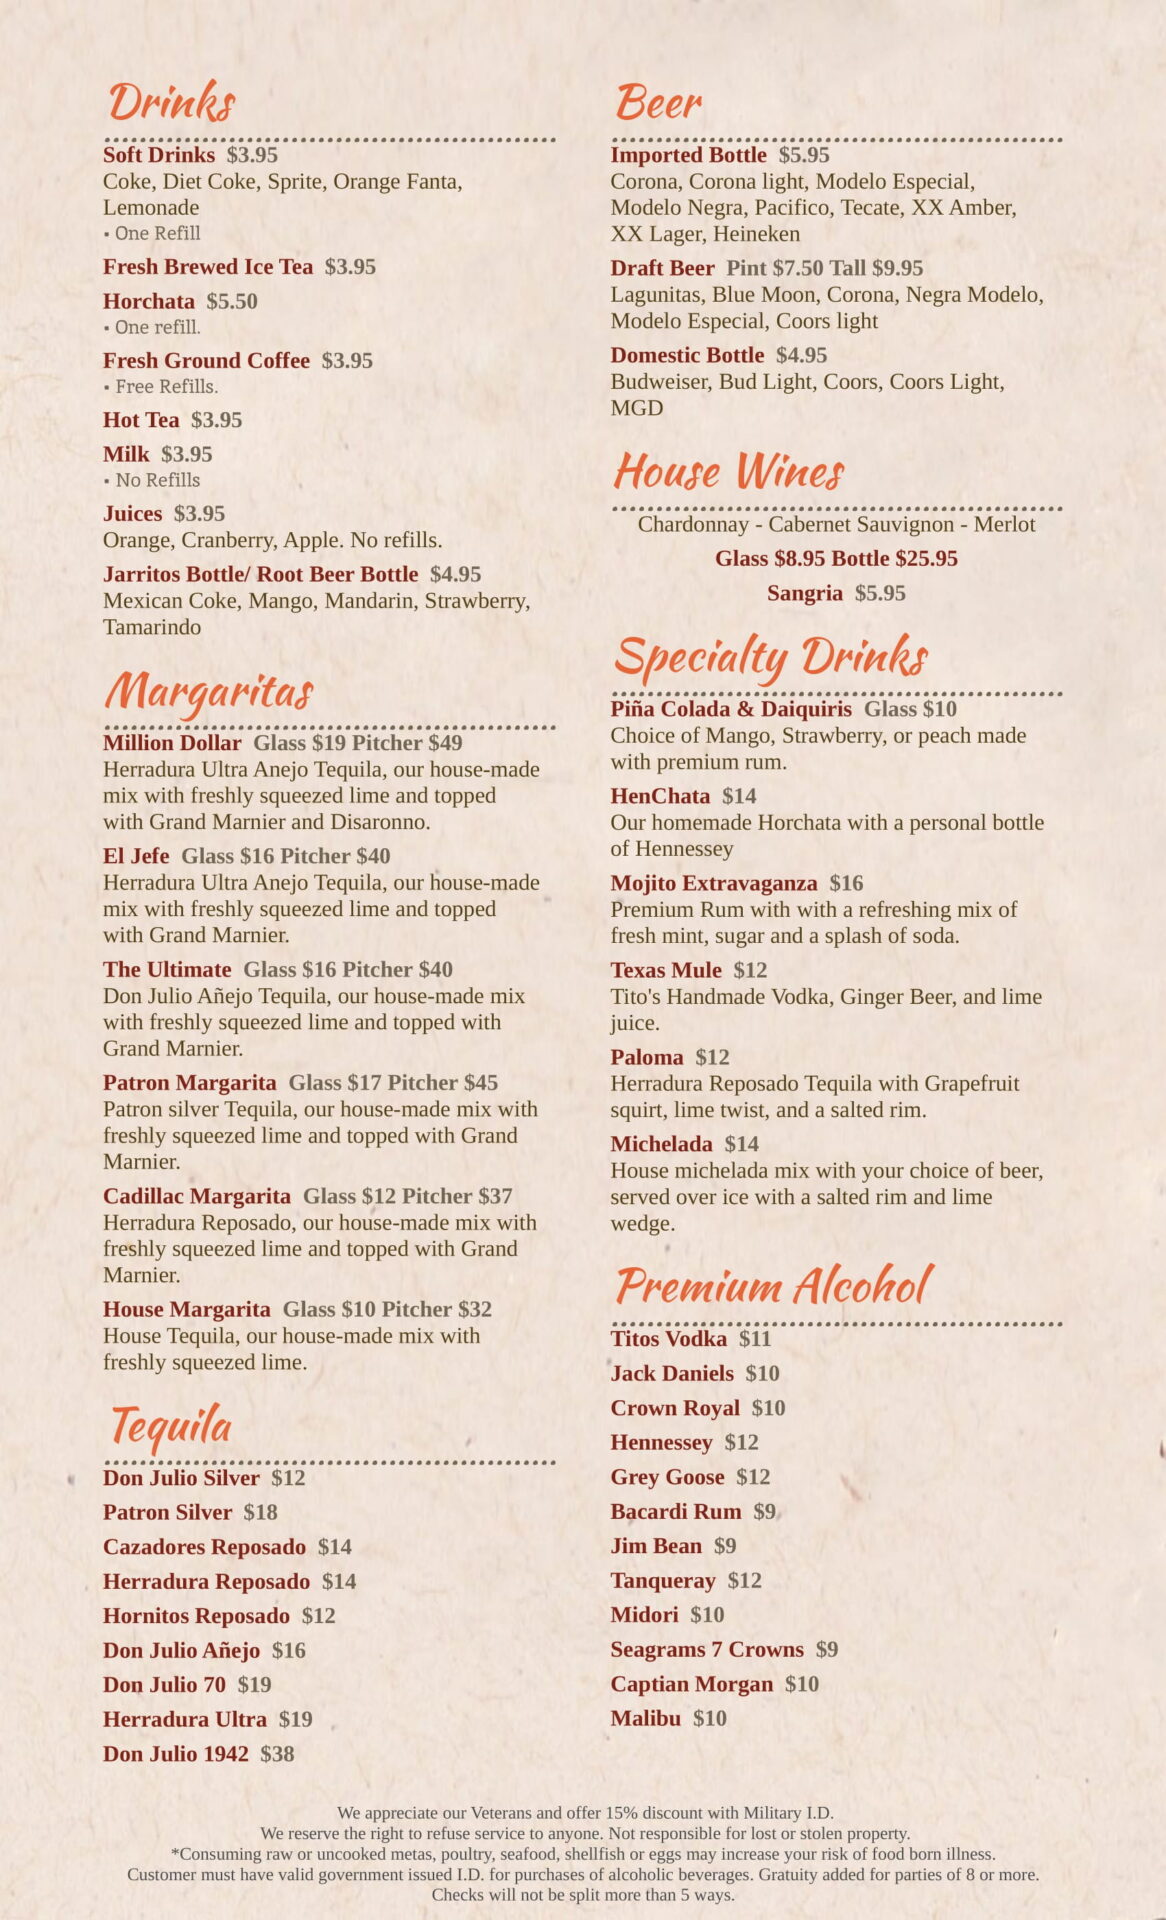 Drinks and alcohol menu on display of the website